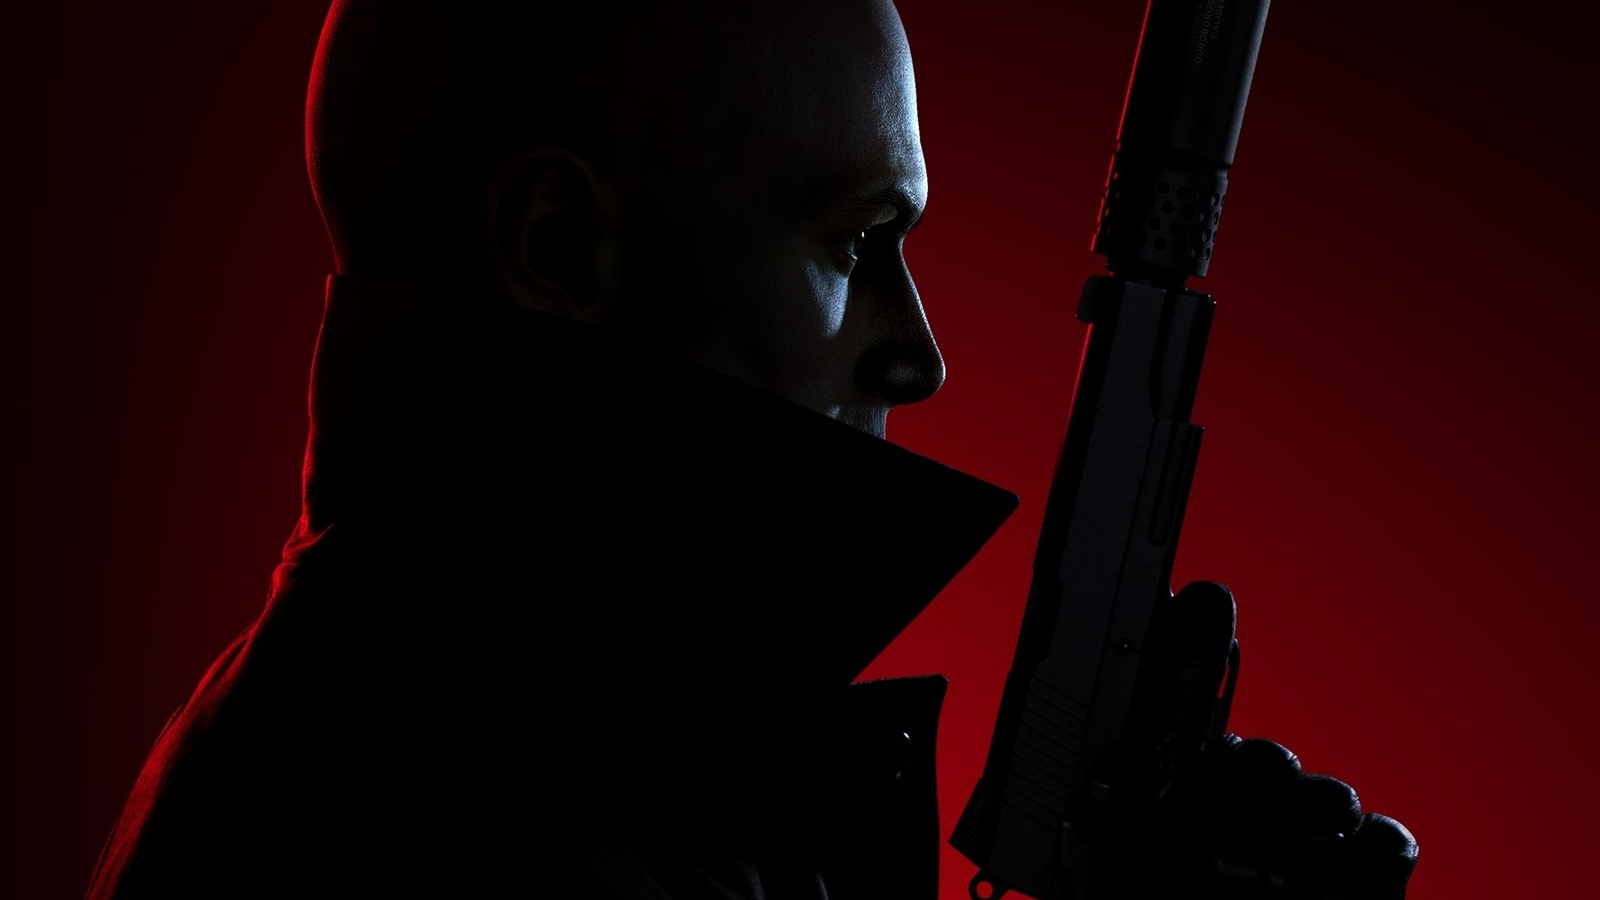 Hitman 3 Delivers its First Elusive Targets and Escalation Challenges in  February